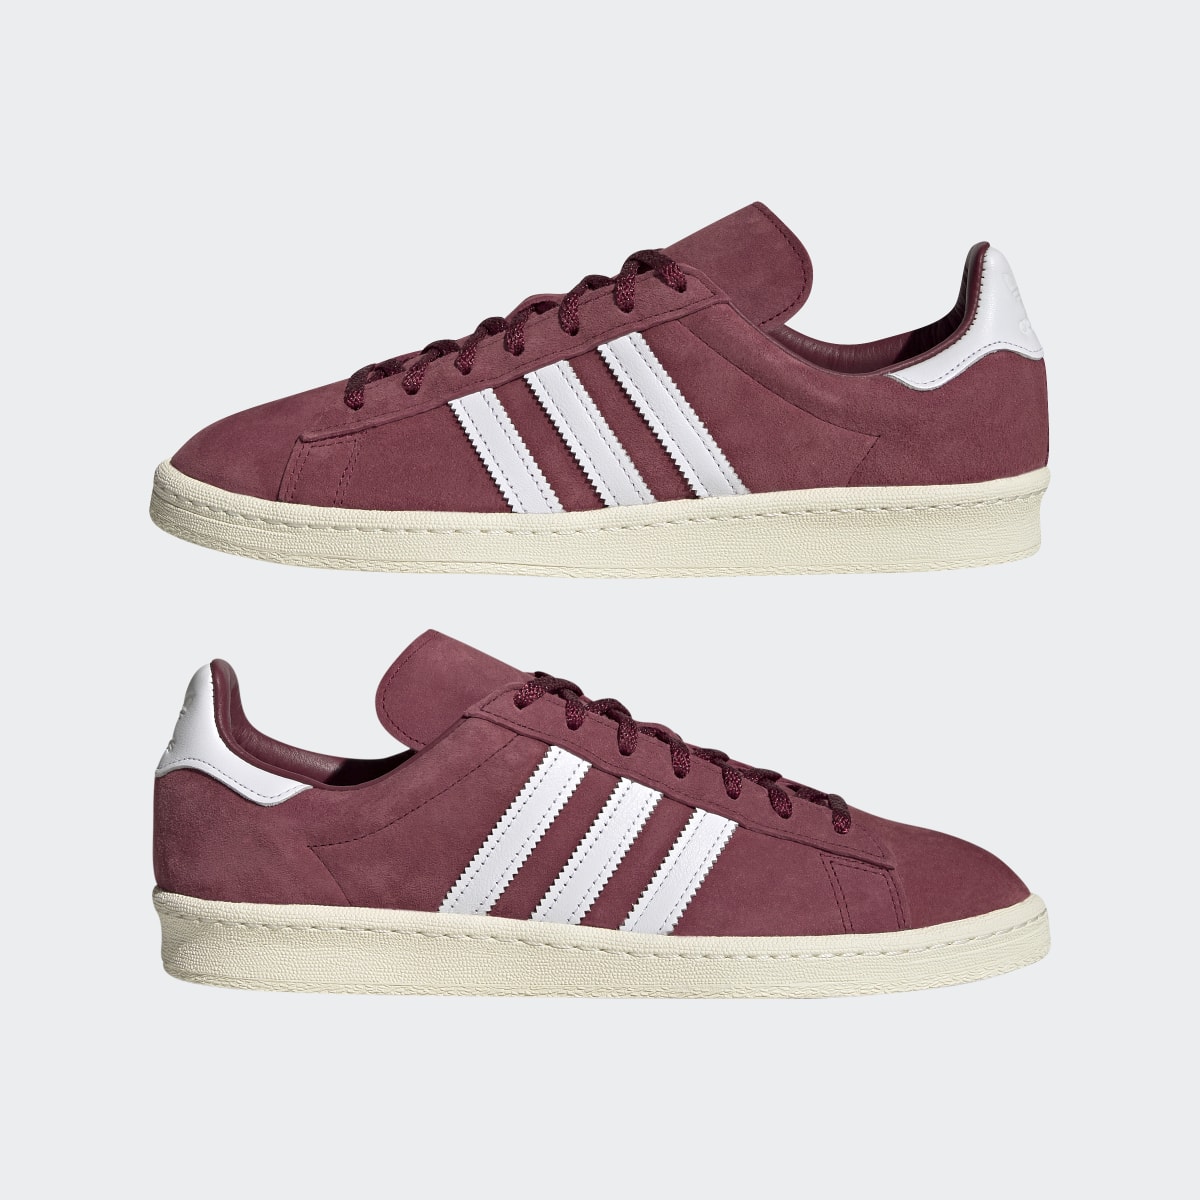 Adidas Campus 80s Shoes. 8